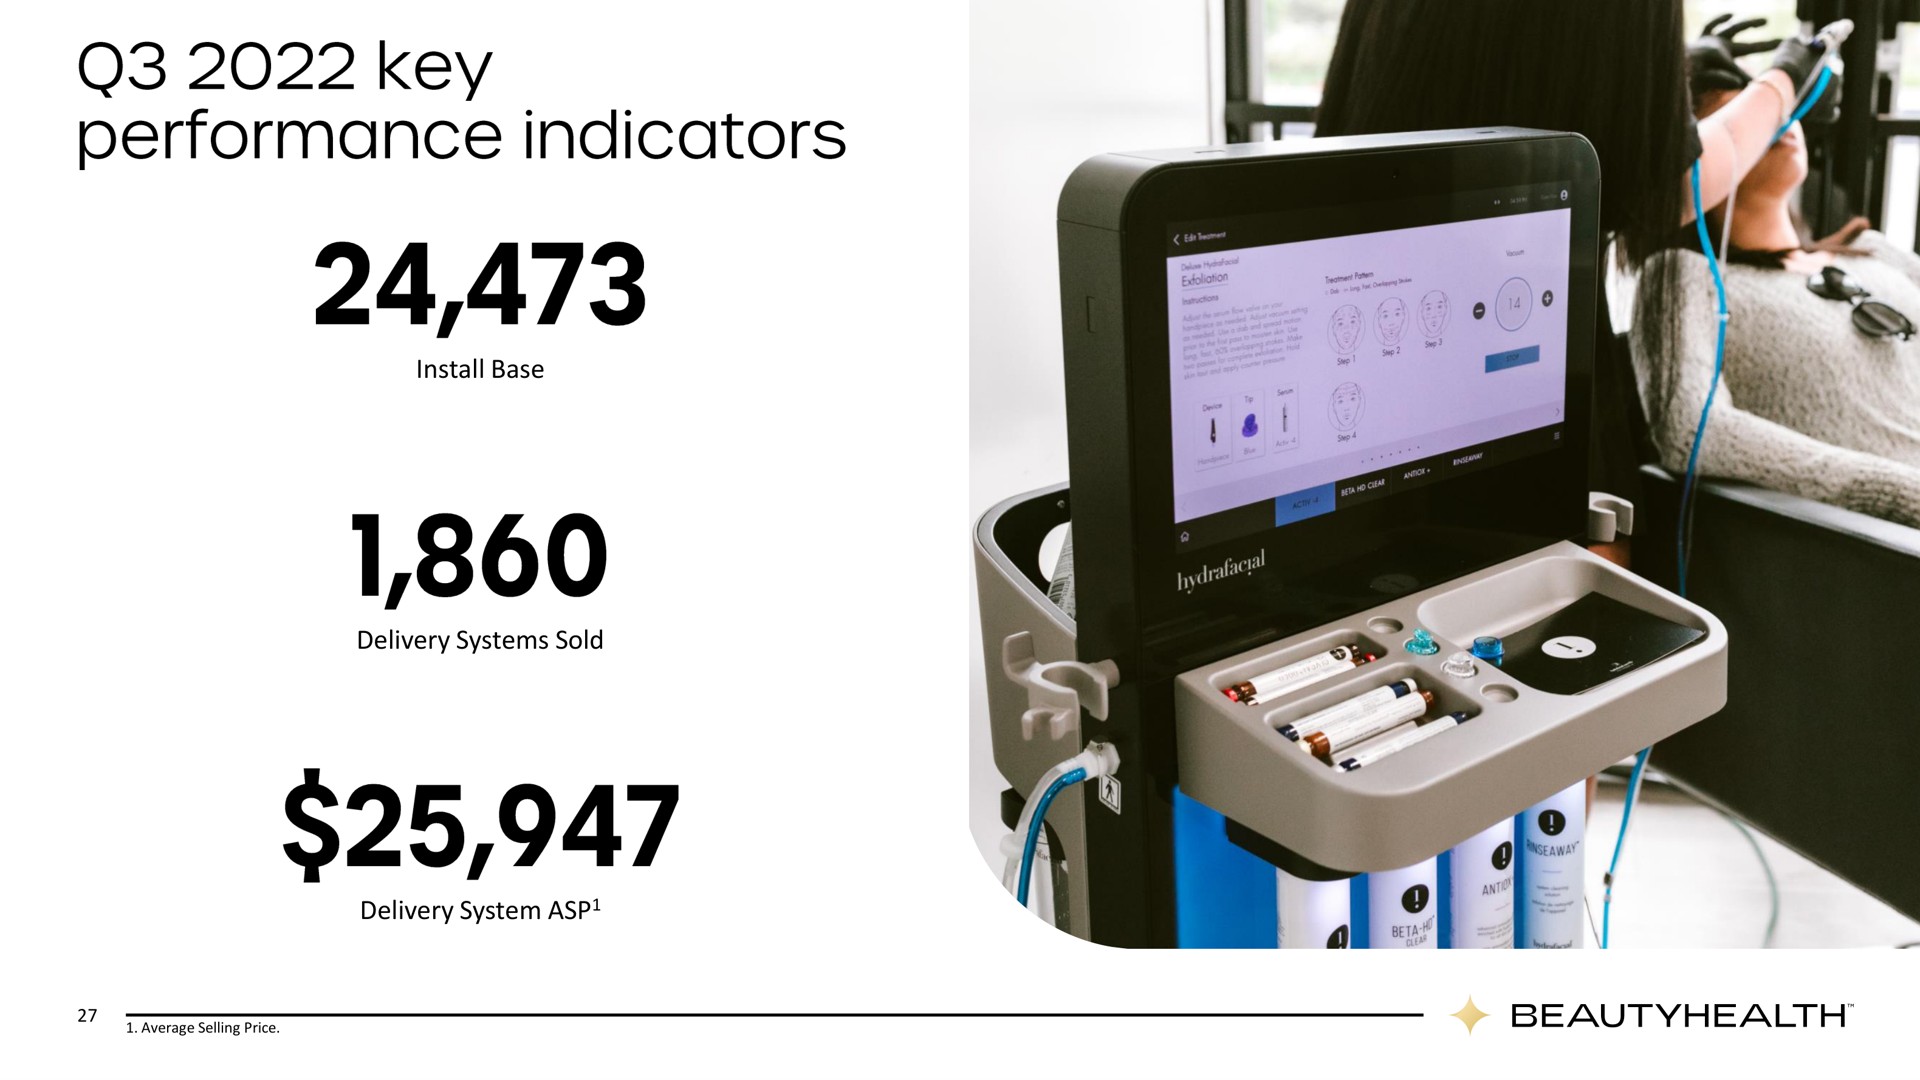 install base delivery systems sold delivery system asp key performance indicators | Hydrafacial